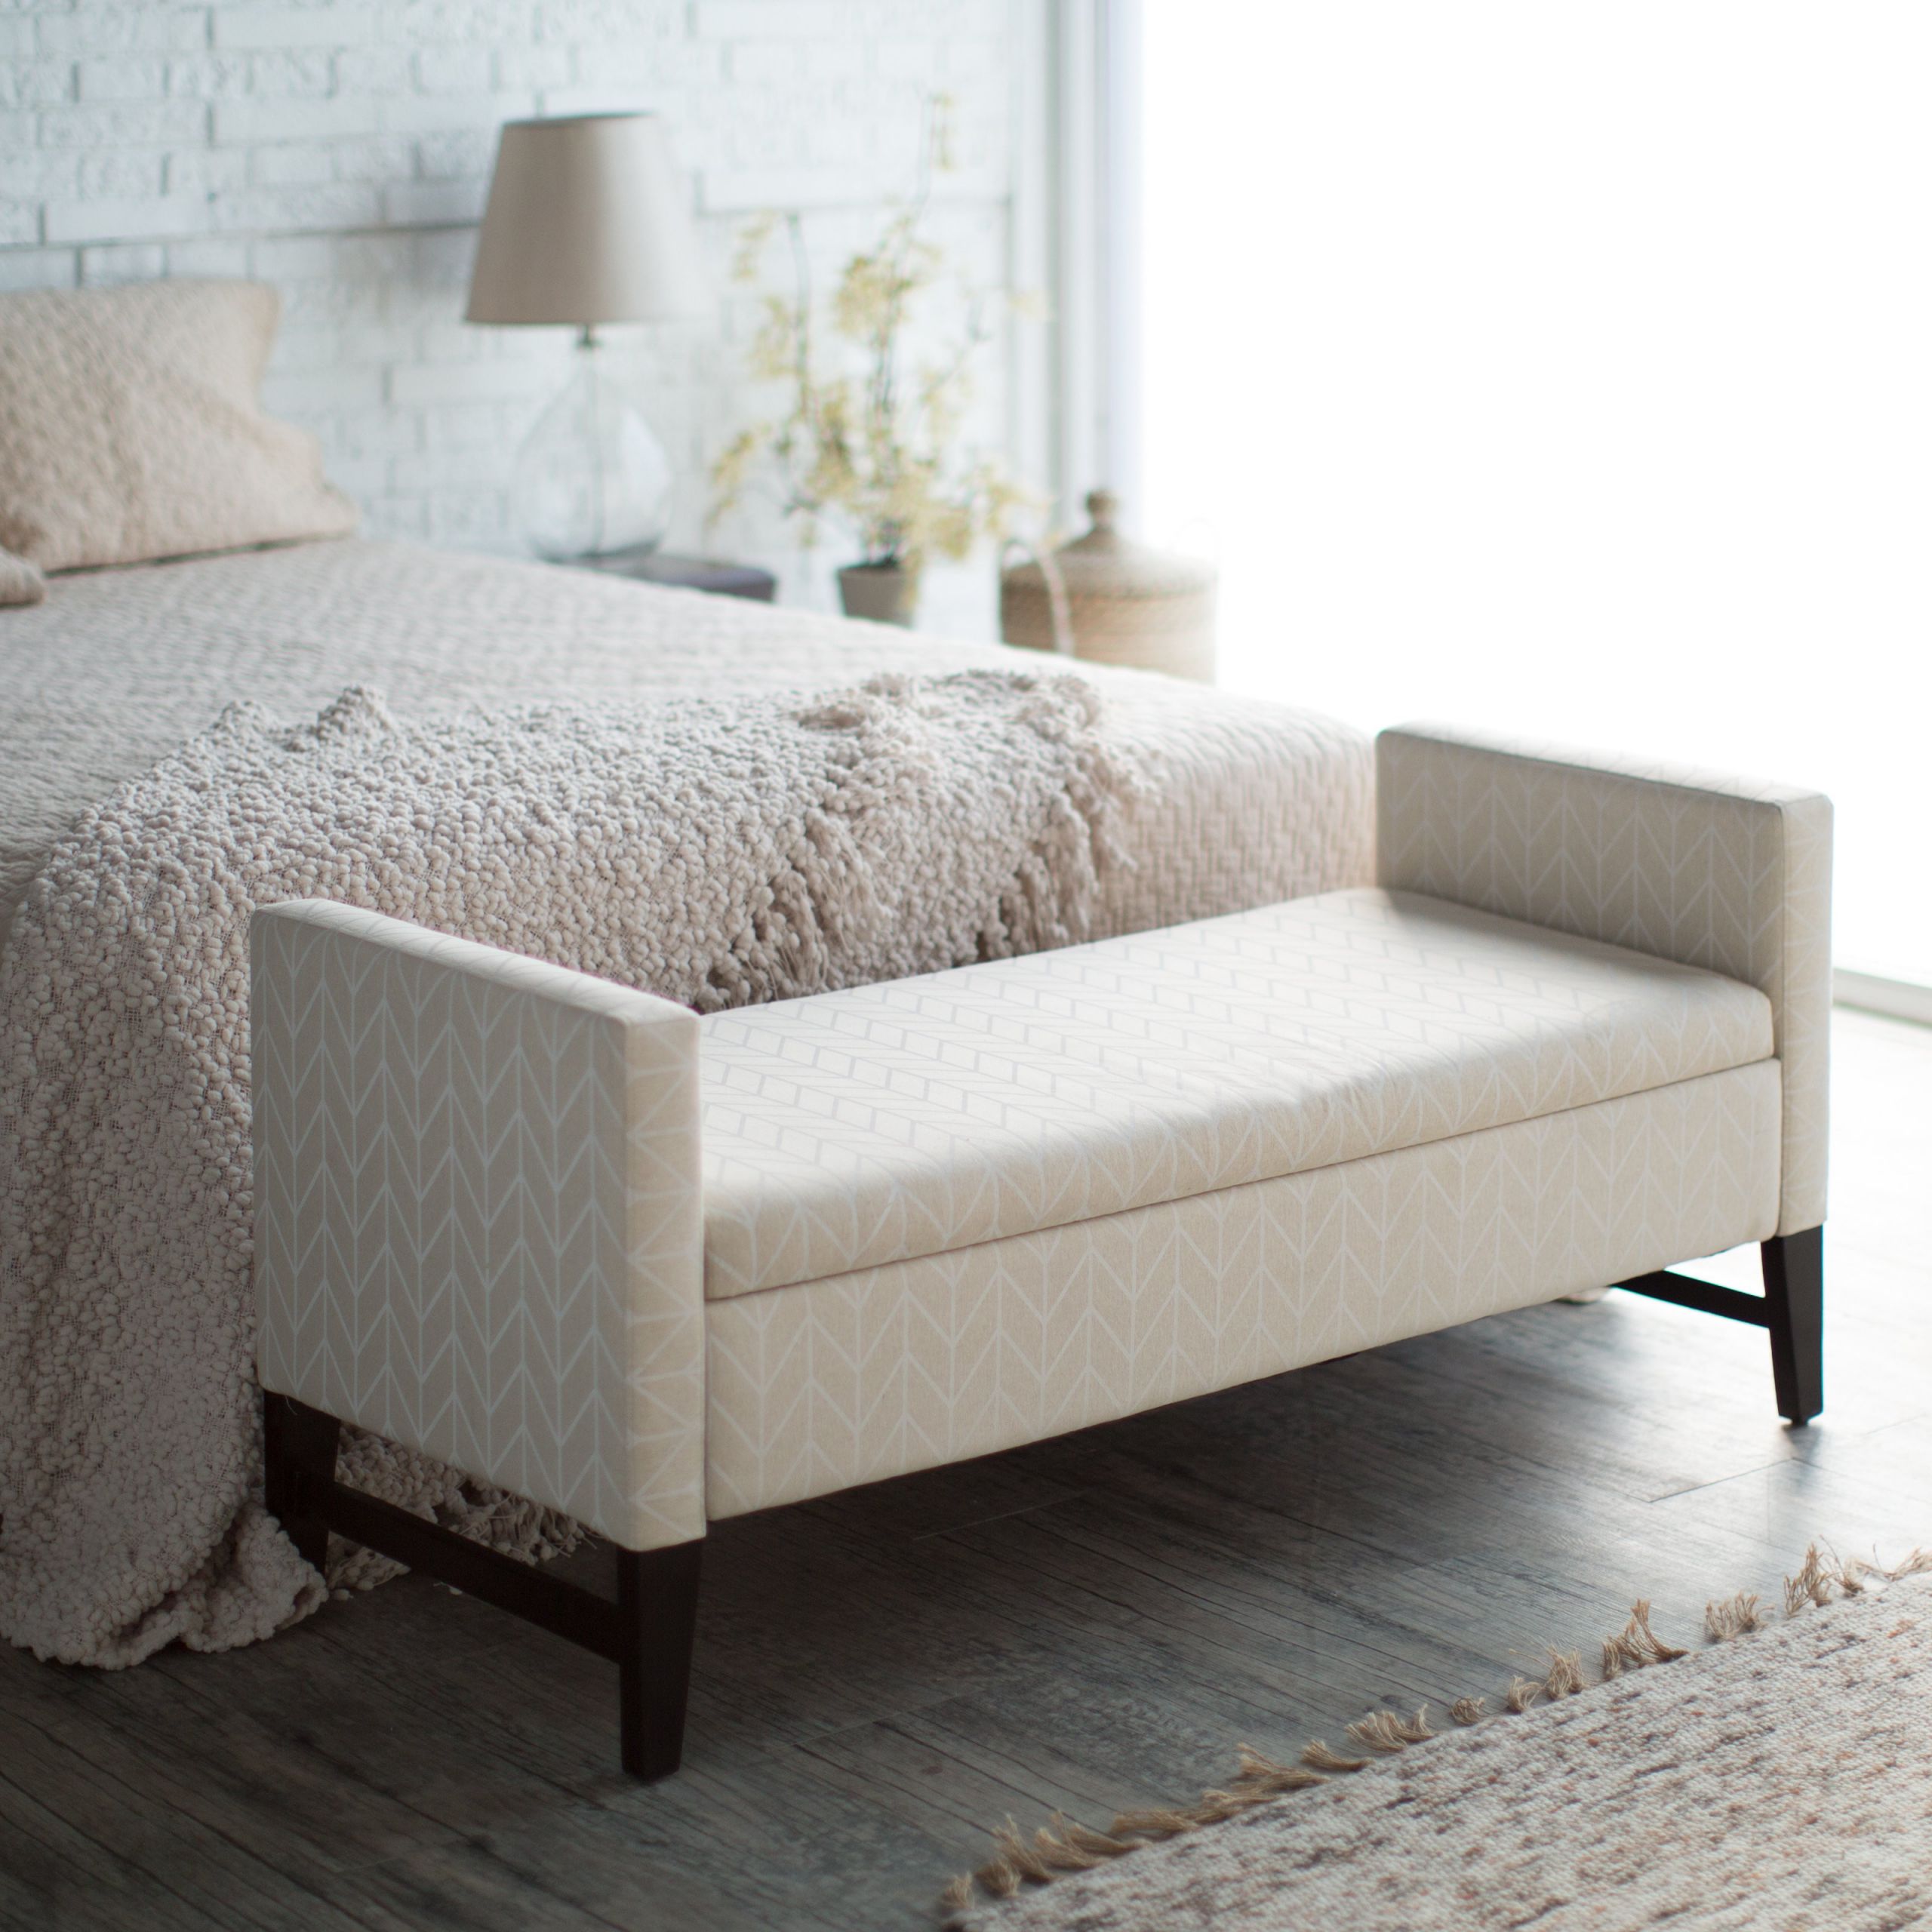 Bench For Bedroom With Storage
 Upholstered Bench with Storage – HomesFeed